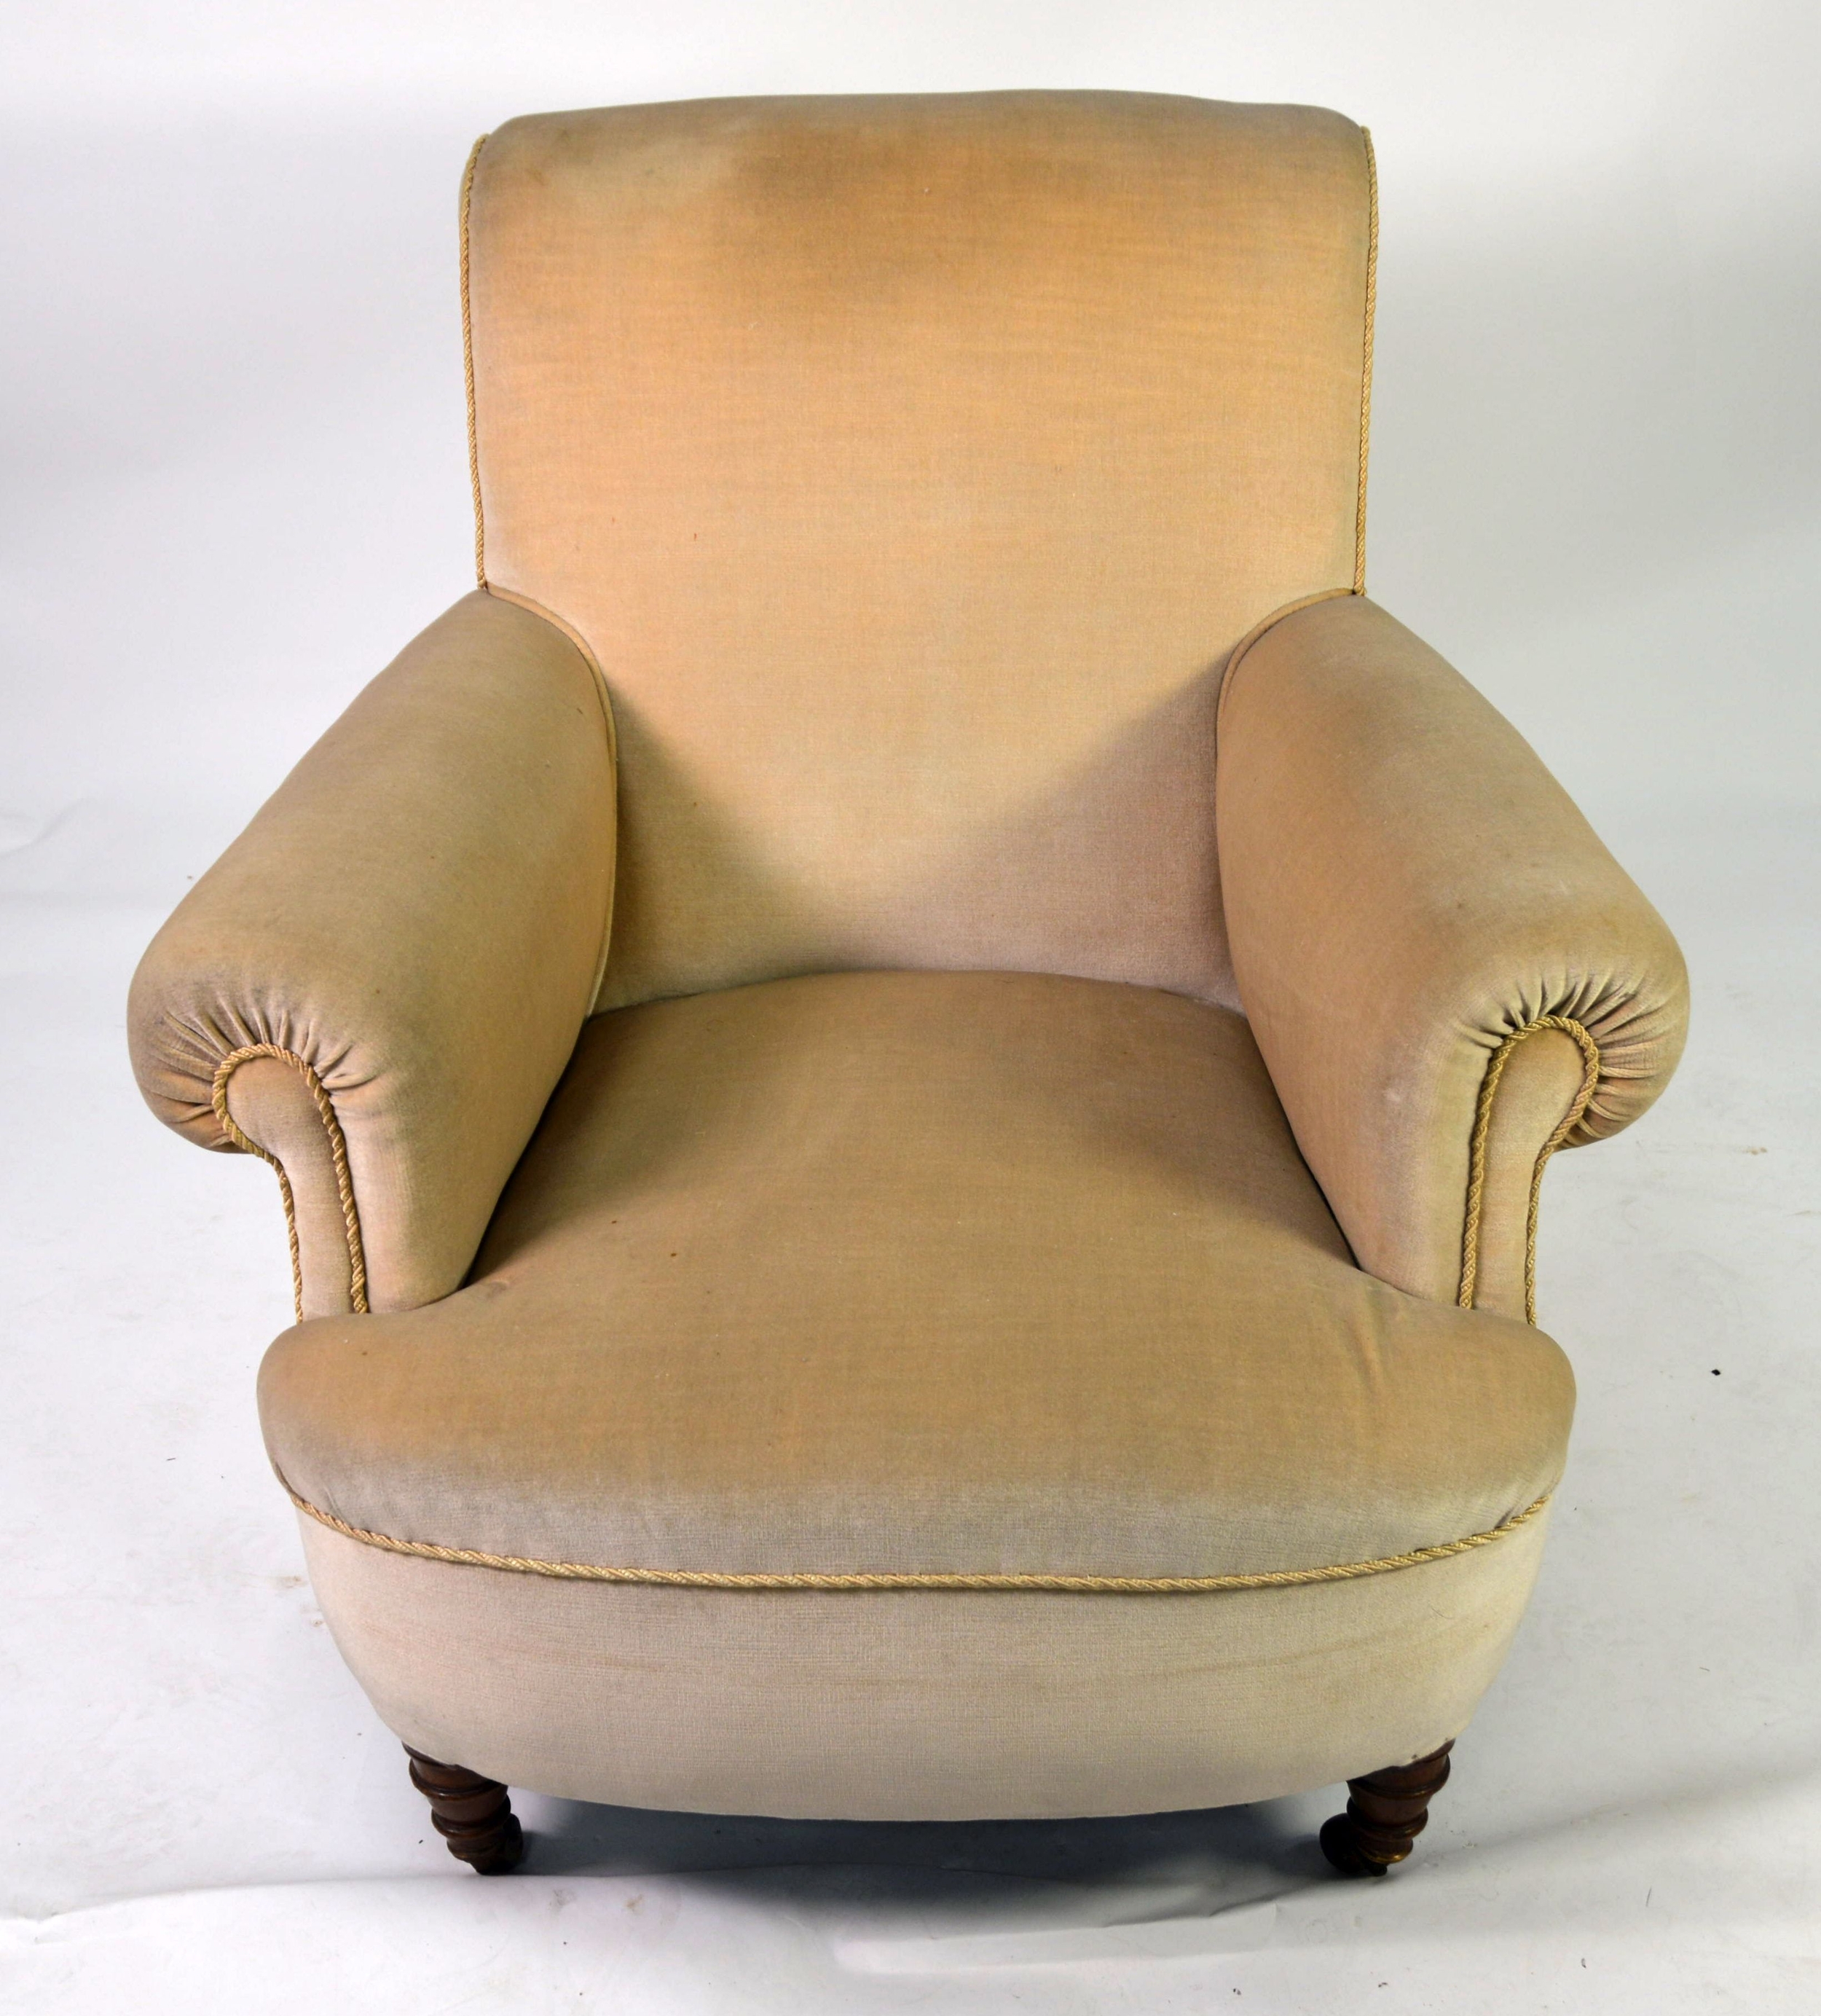 A HOWARD STYLE BOW FRONT ARMCHAIR covered in Beige fabric raised on turned front legs